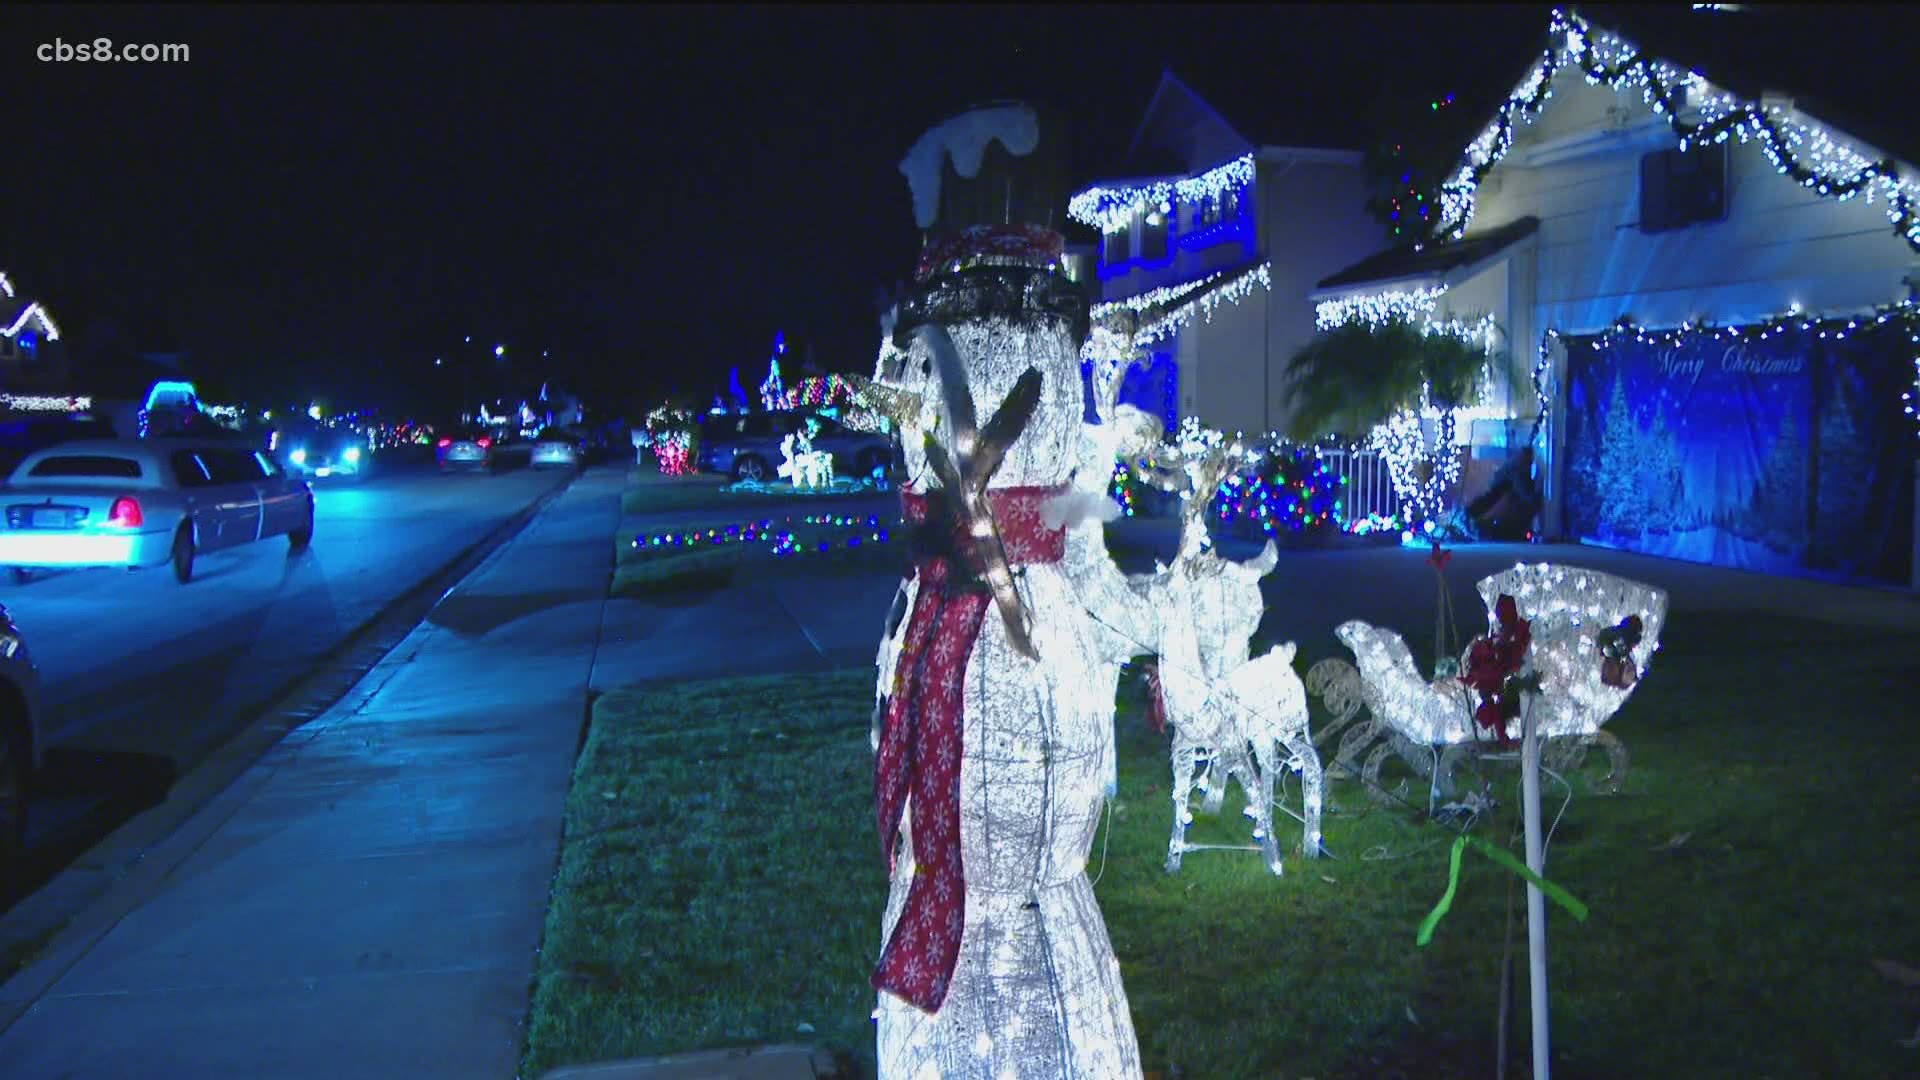 In a neighborhood known for festive displays, someone keeps cutting the wires of their Christmas decorations.